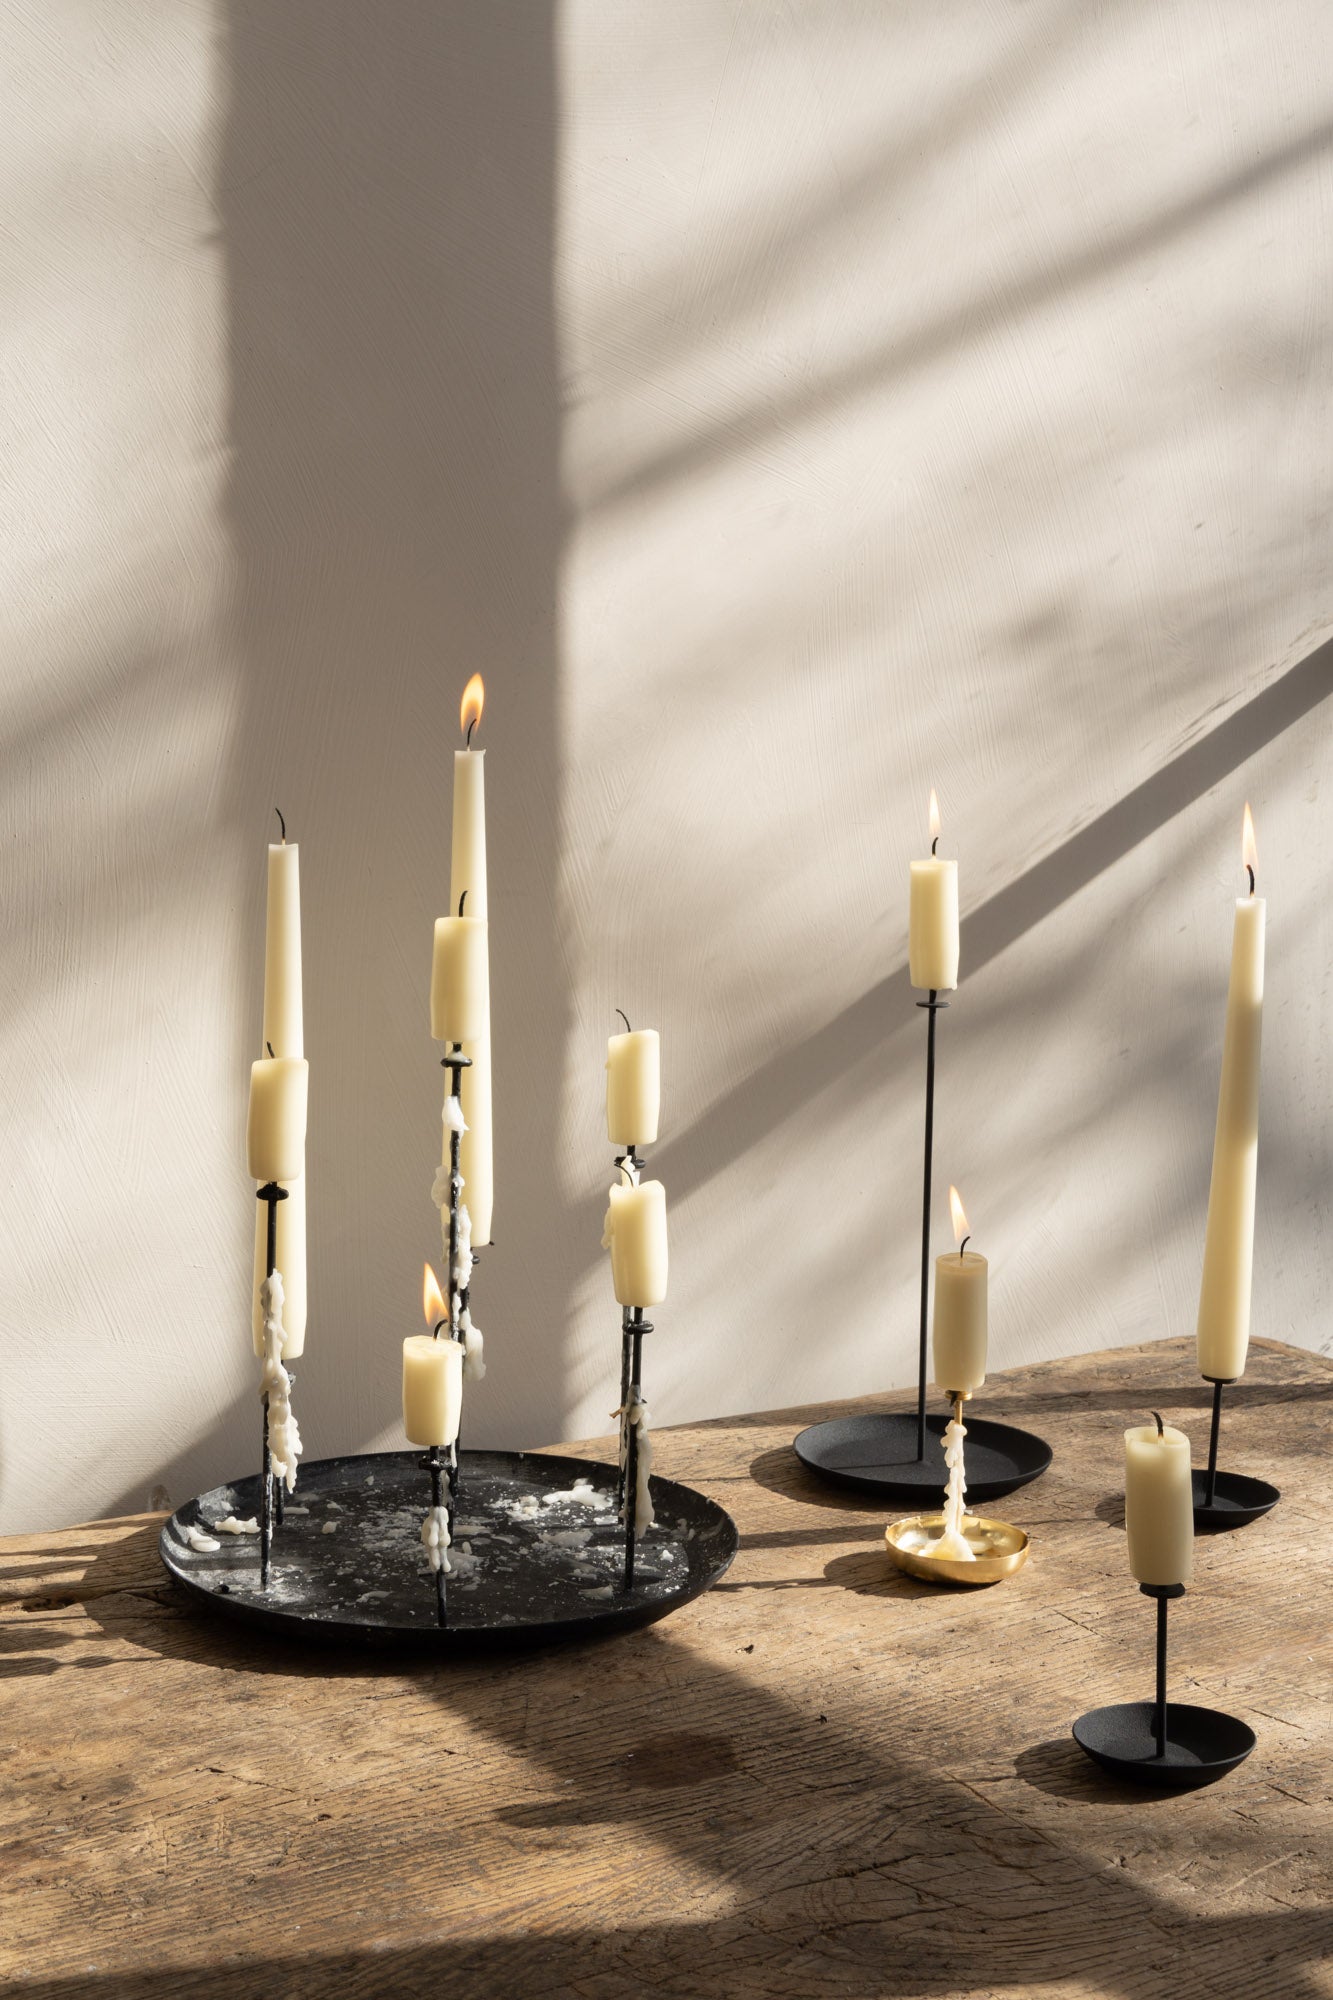 Different lengths of candles on the multi candle pin holder, highlighting its compact and versatile design. Ideal for creating stylish and secure candle setups.